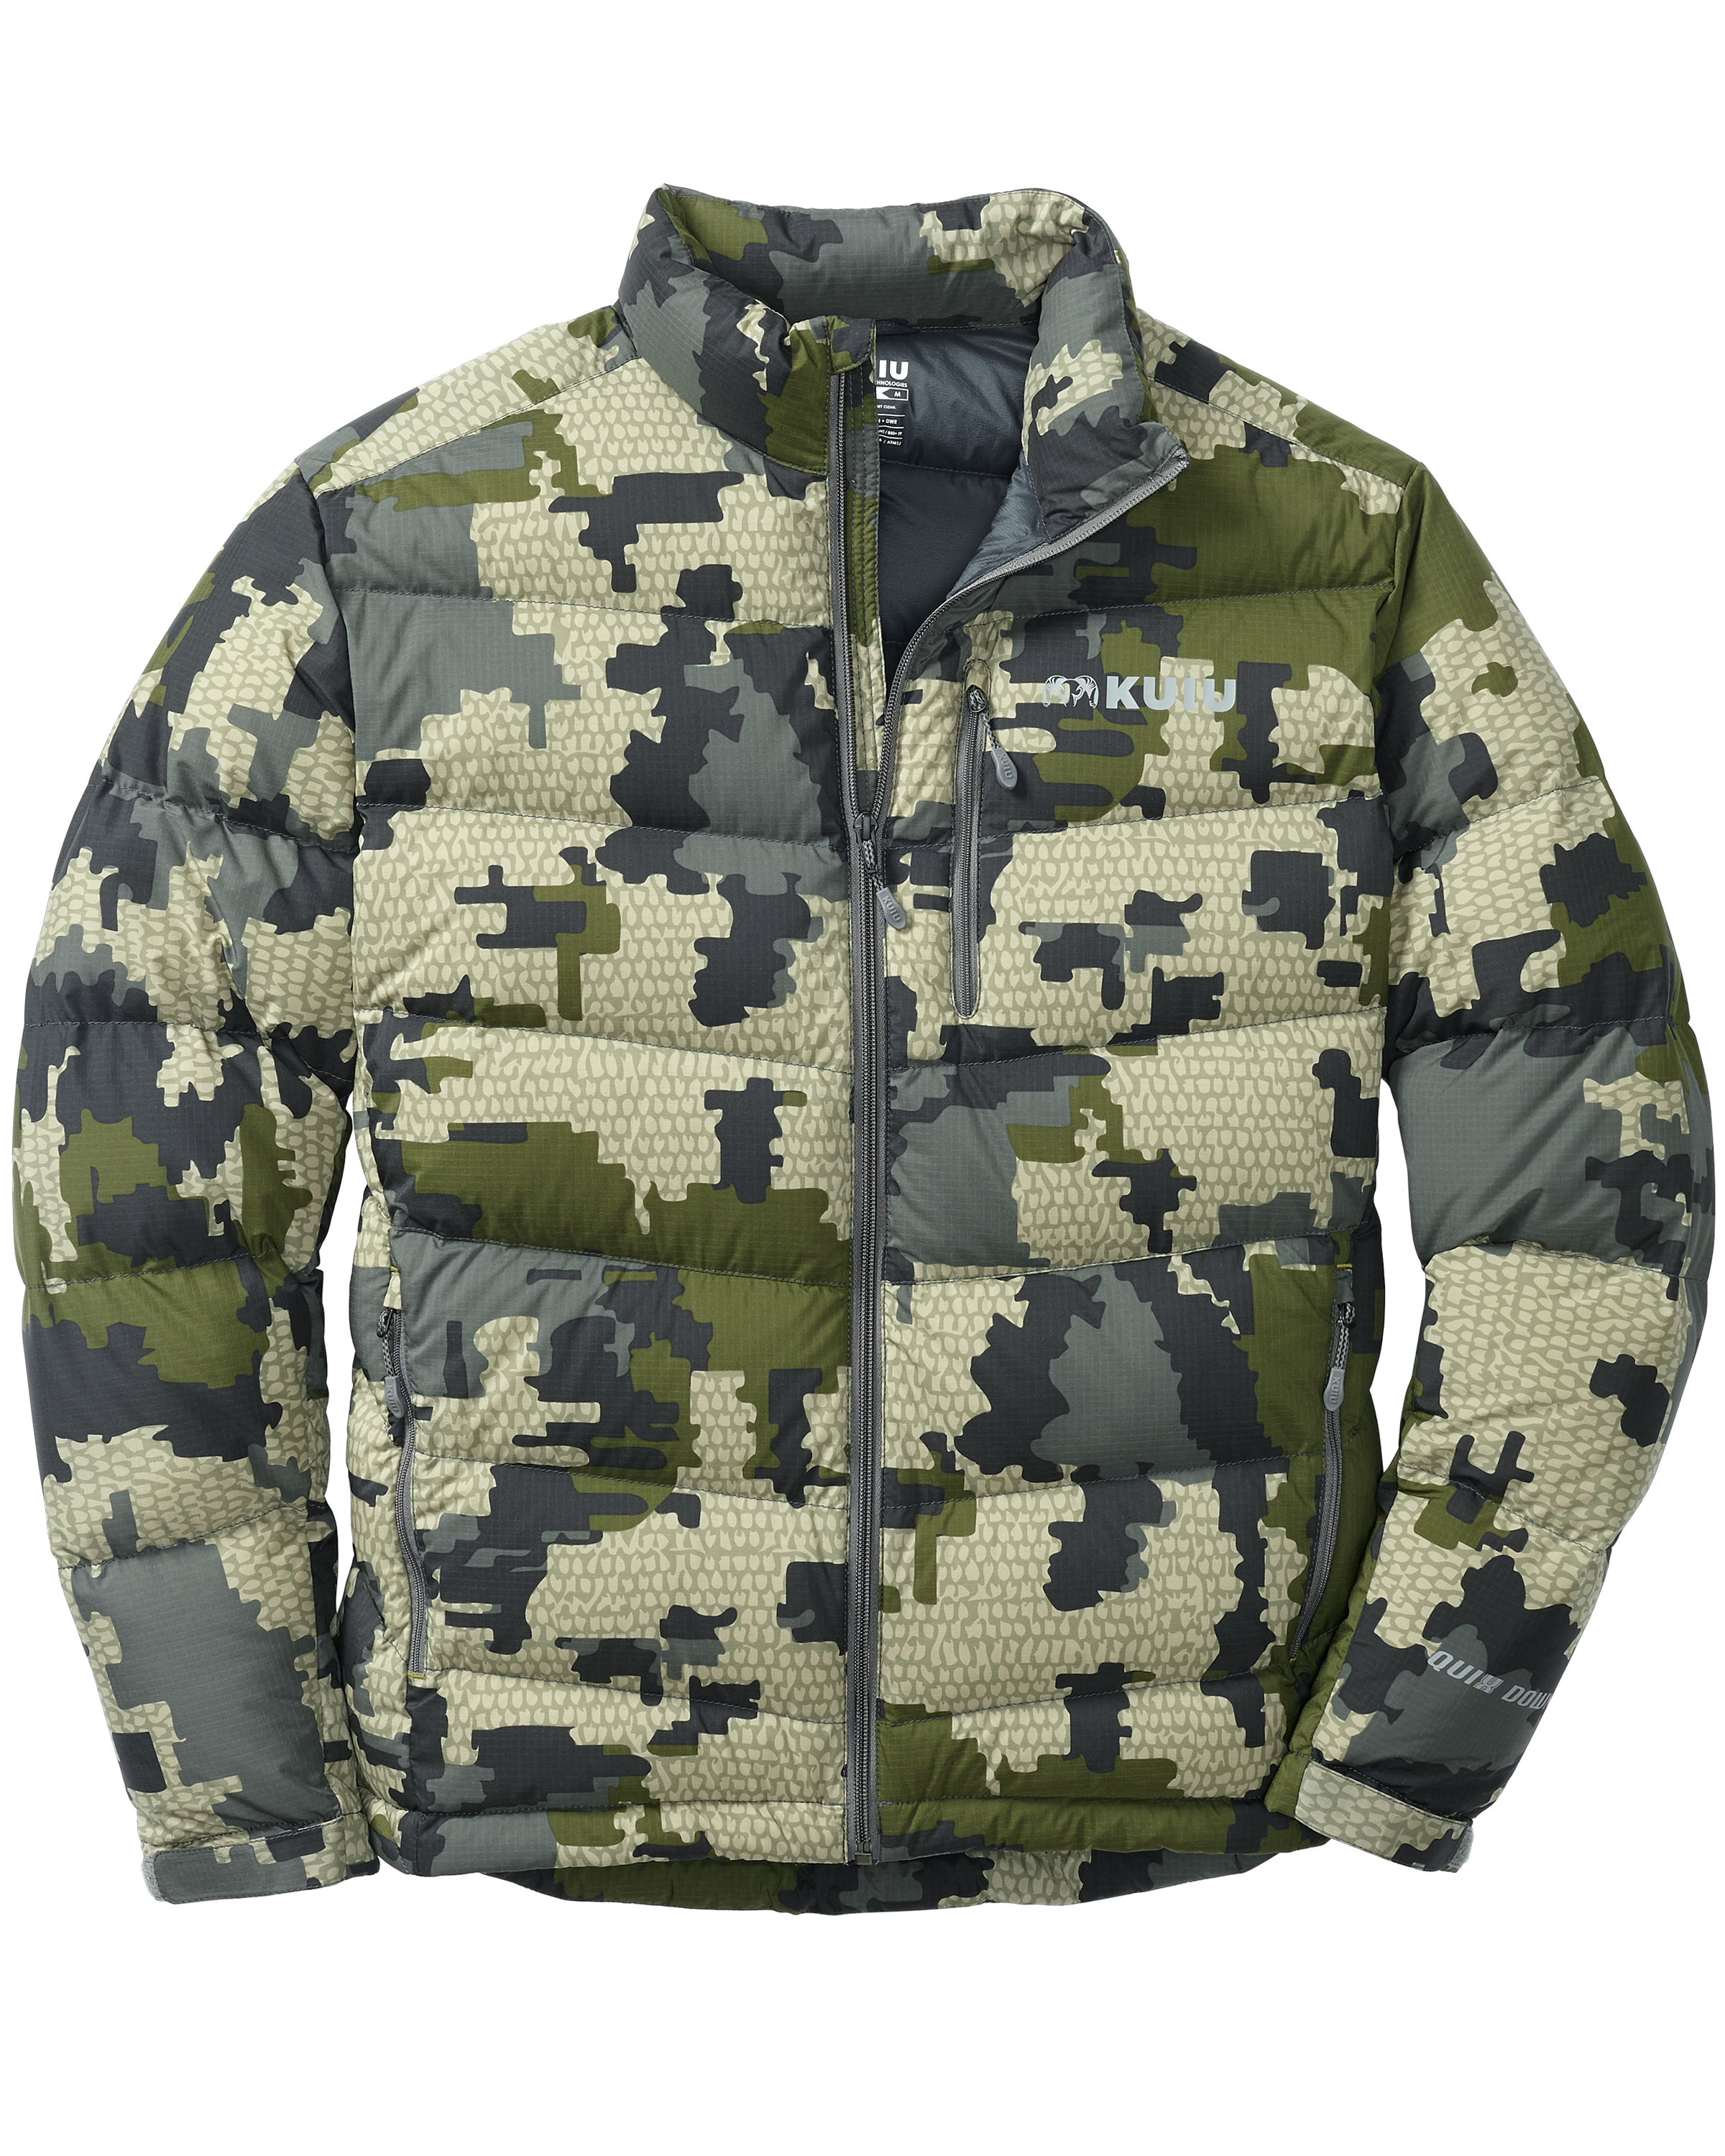 KUIU Super Down PRO Hunting Jacket in Verde | Size XL